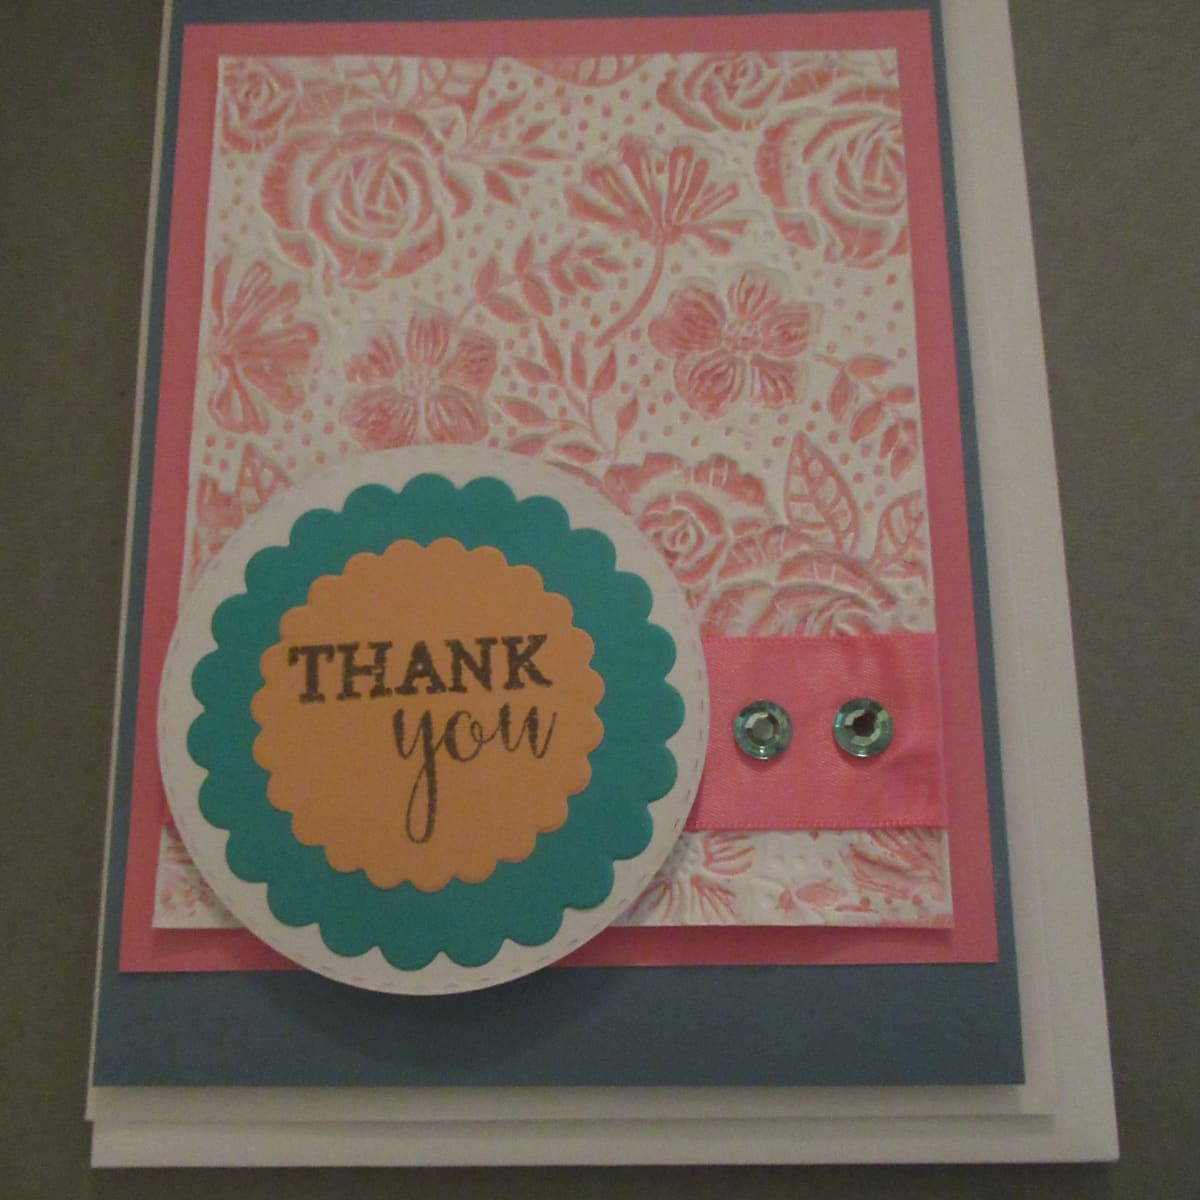 Good quality 3D Embossing Folders are a game-changer! : r/cardmaking